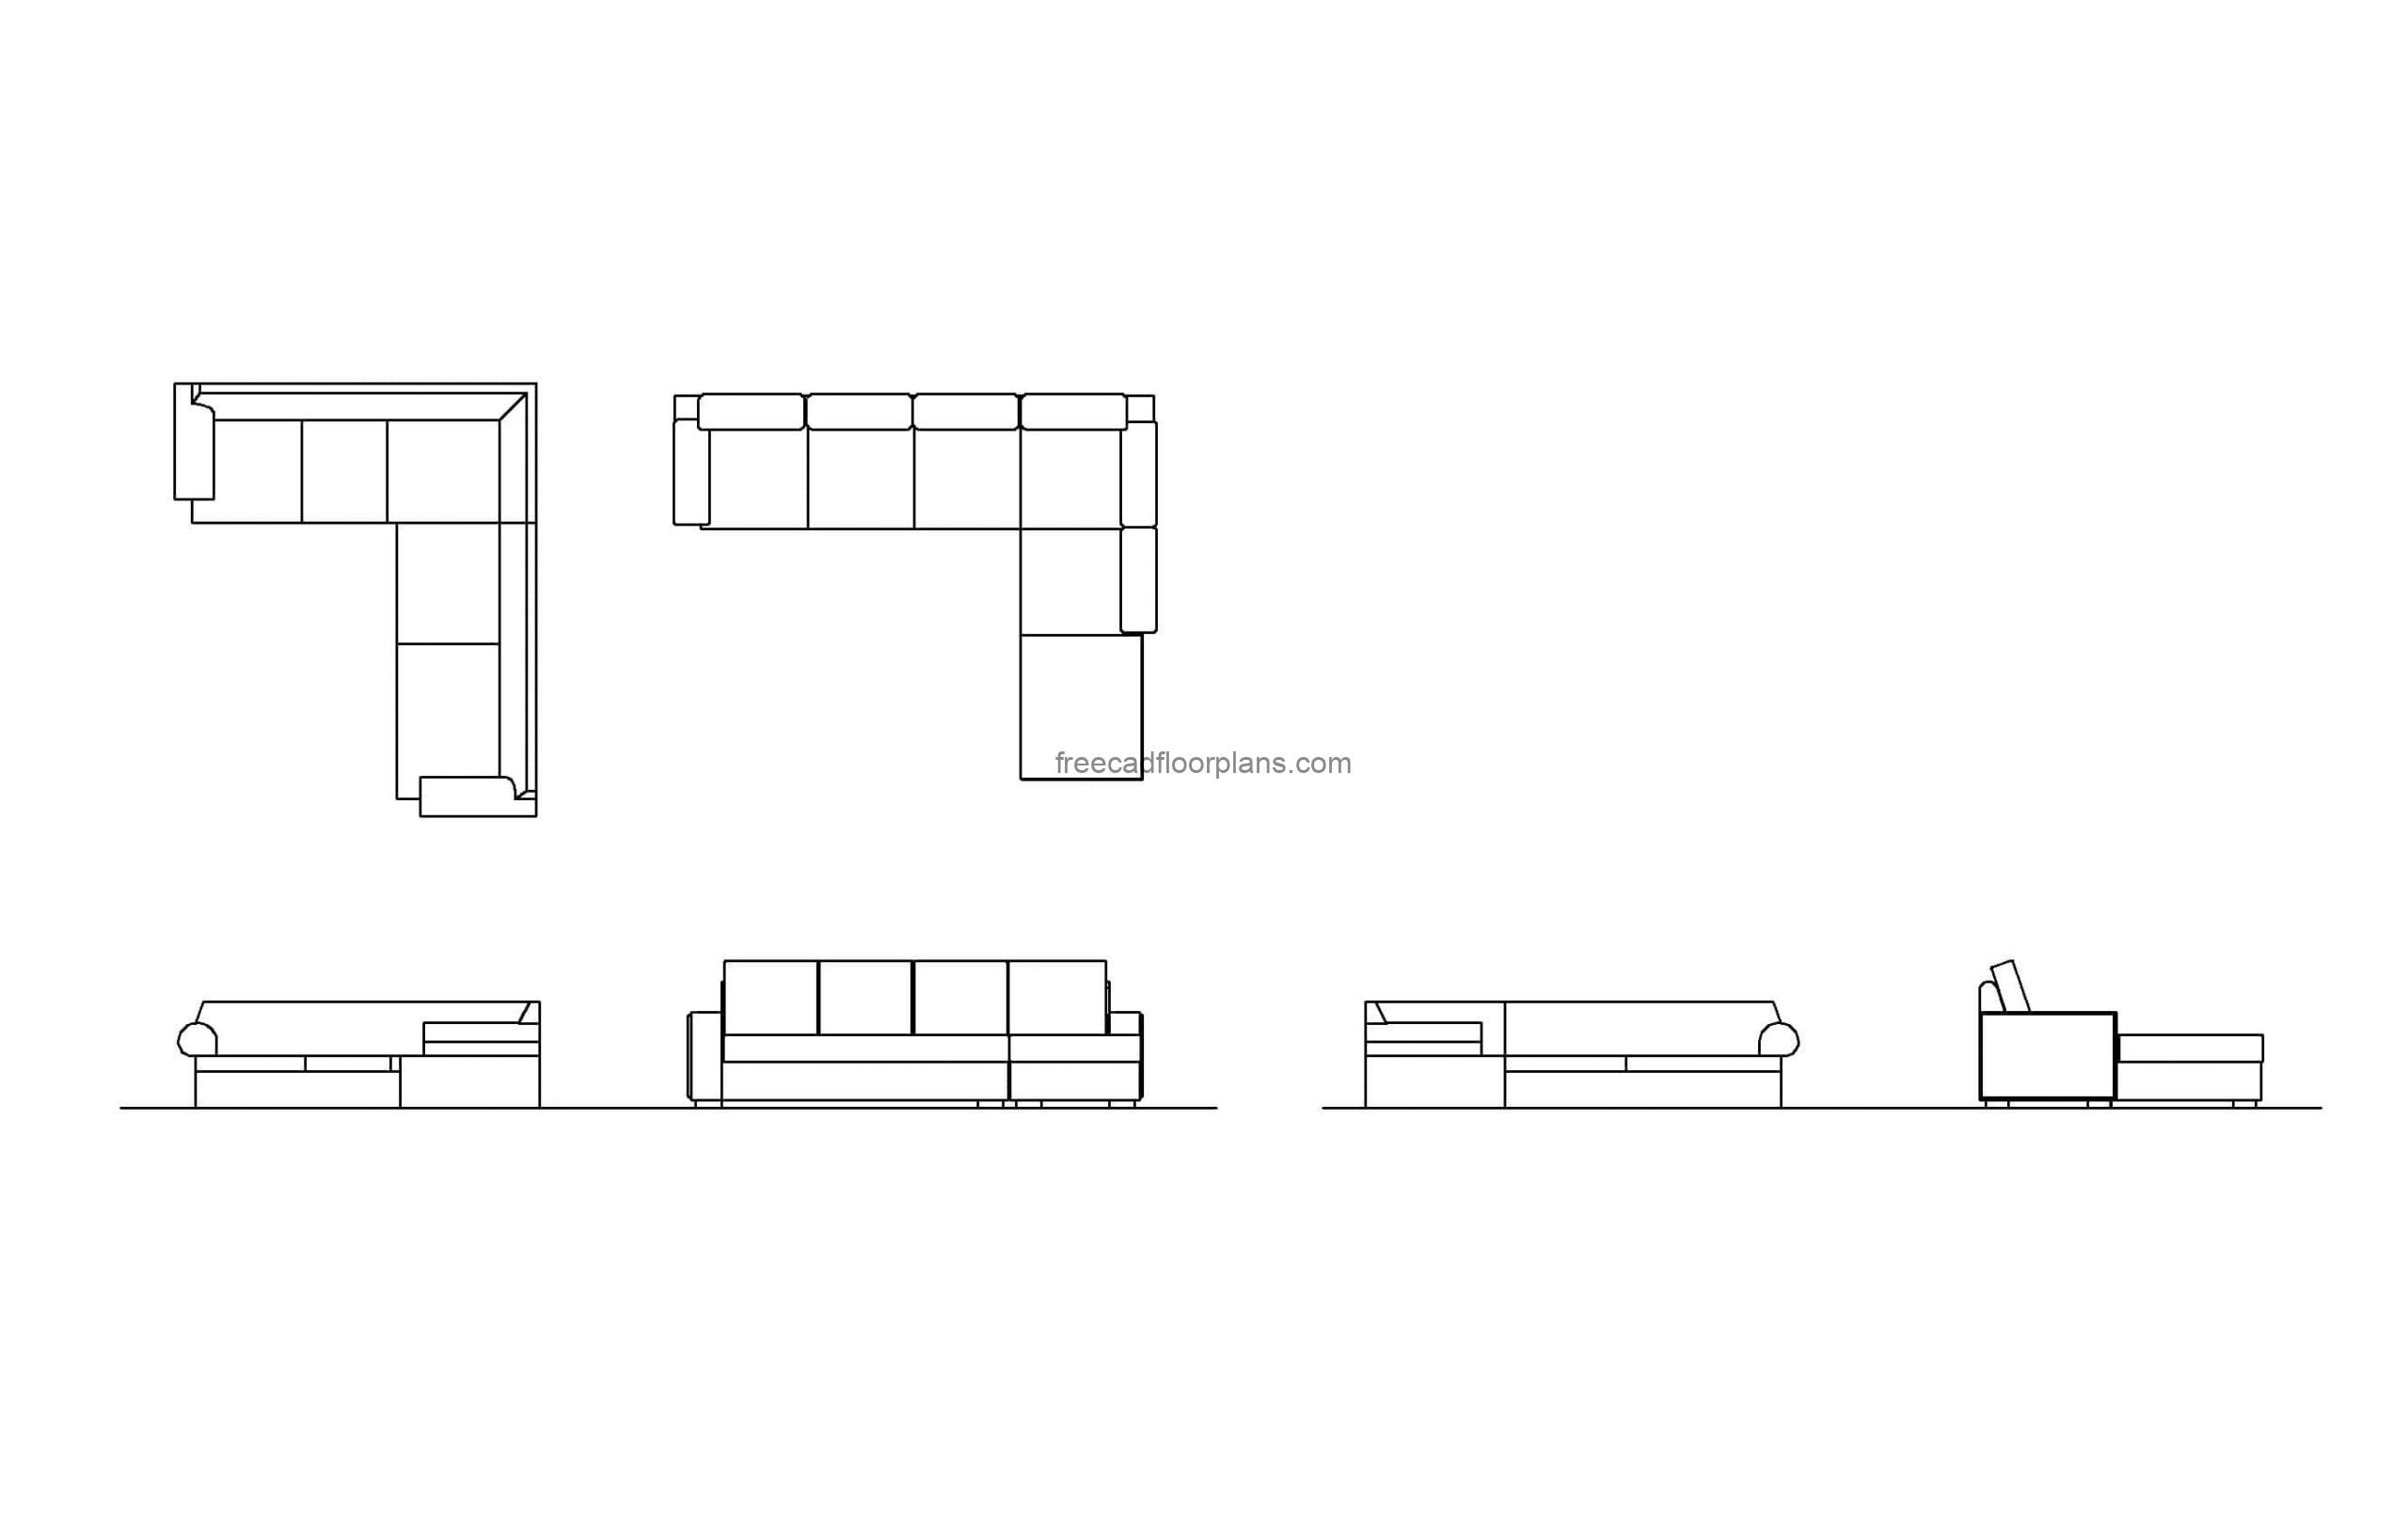 L shape couch autocad drawing plan and elevations views dwg file for free download